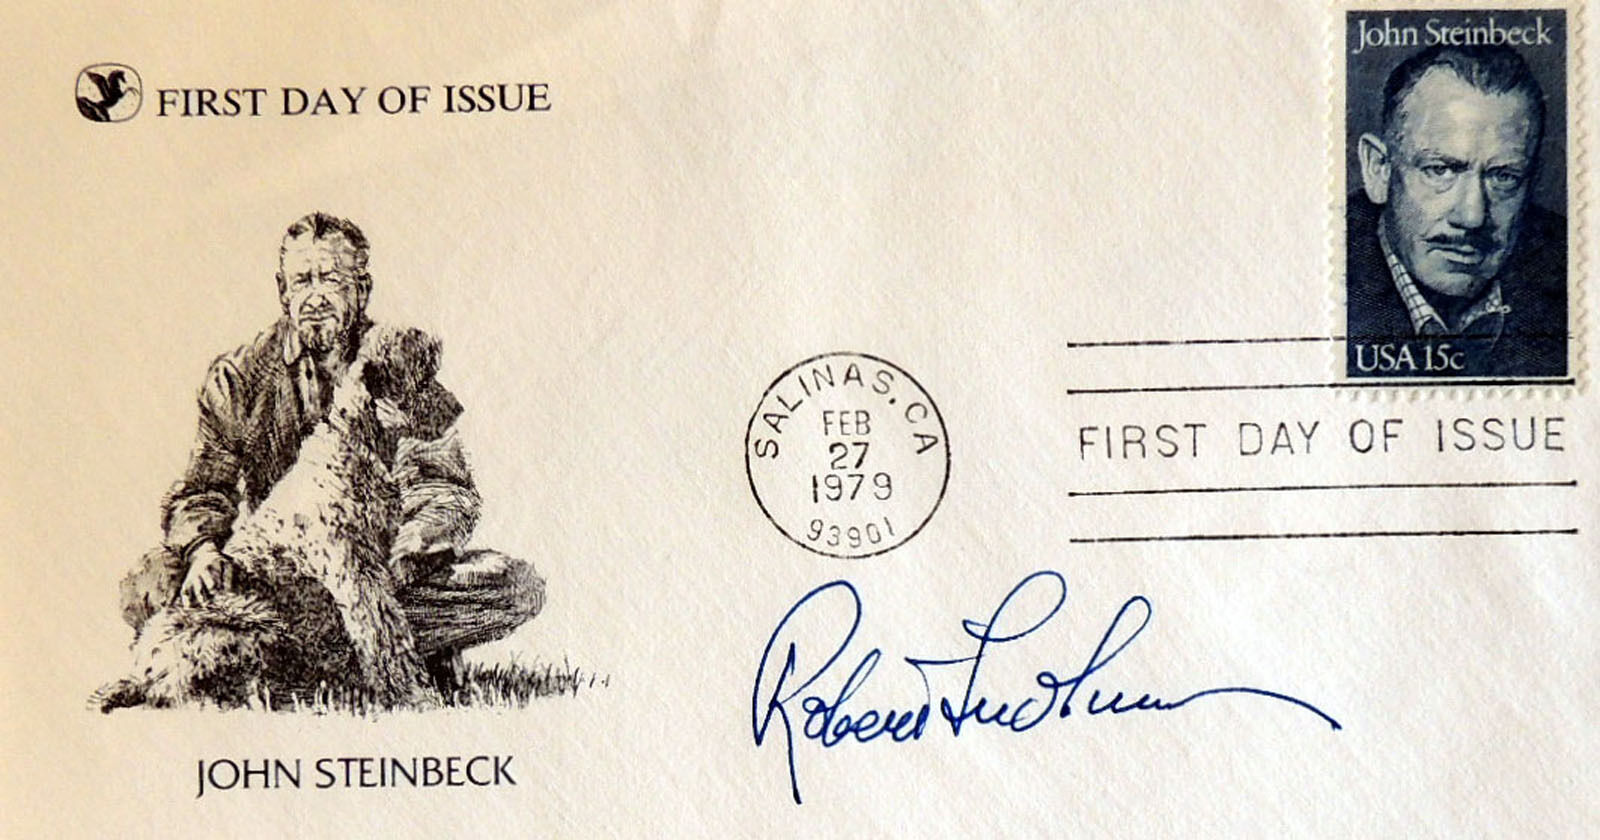 Robert Ludlum - Author - Personally Autographed First Day Cover